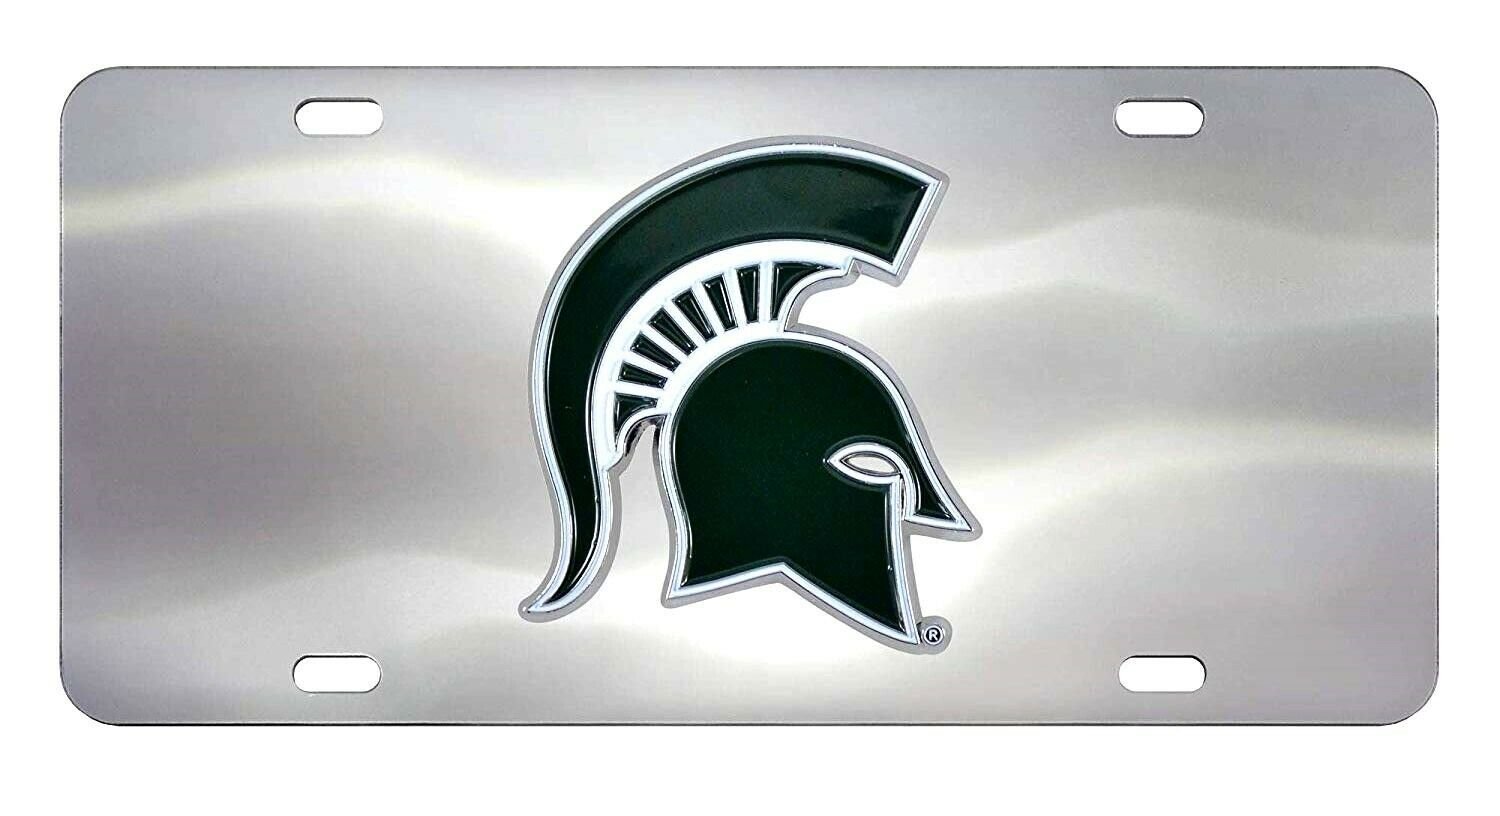 Michigan State University Spartans License Plate Tag, Premium Stainless Steel Diecast, Chrome, Raised Solid Metal Color Emblem, 6x12 Inch